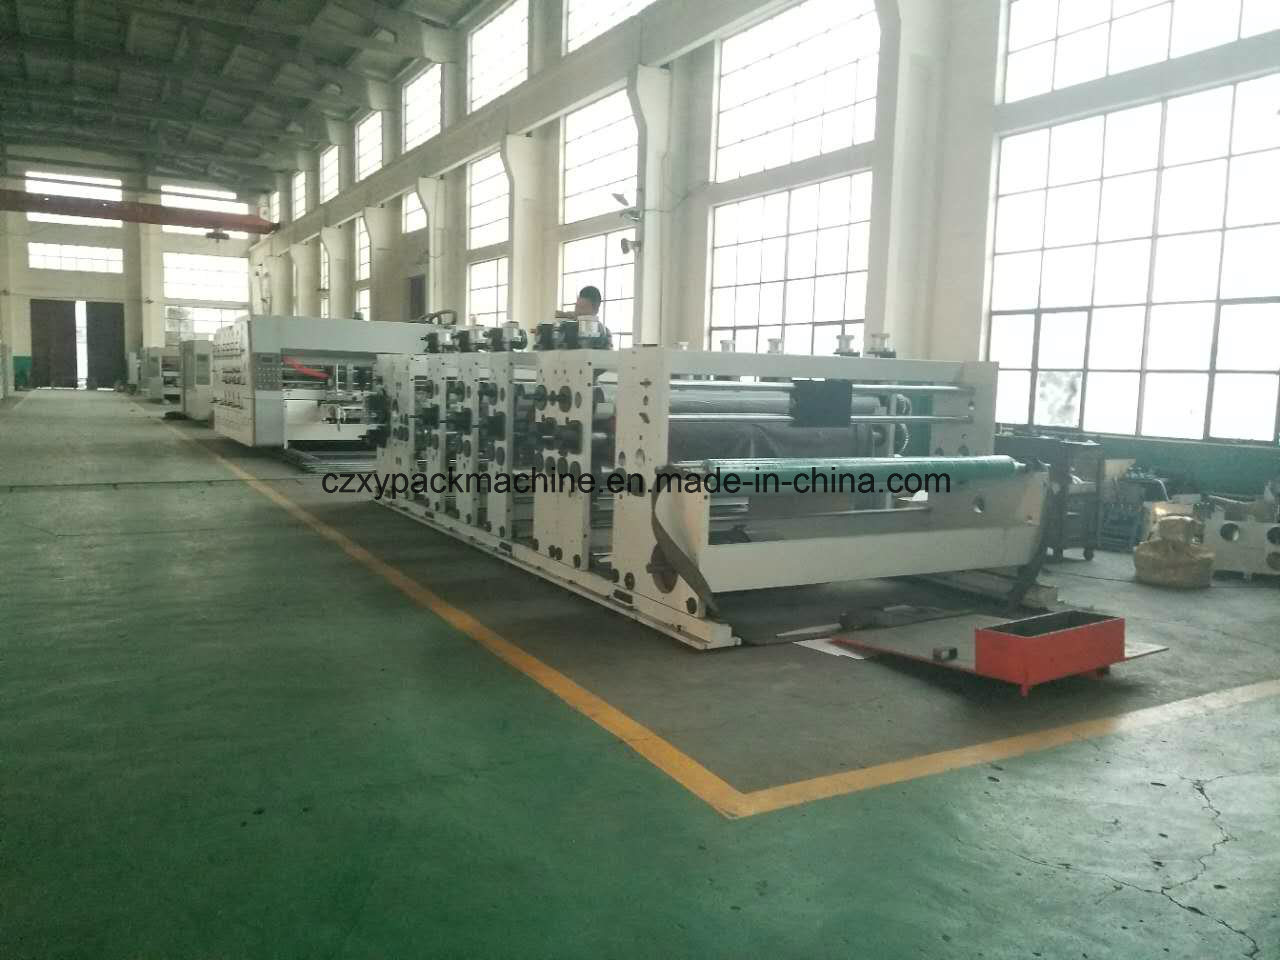 High Definition Fully Automatic Carton Multicolors Flexo Printing Machine with Stacking Machine